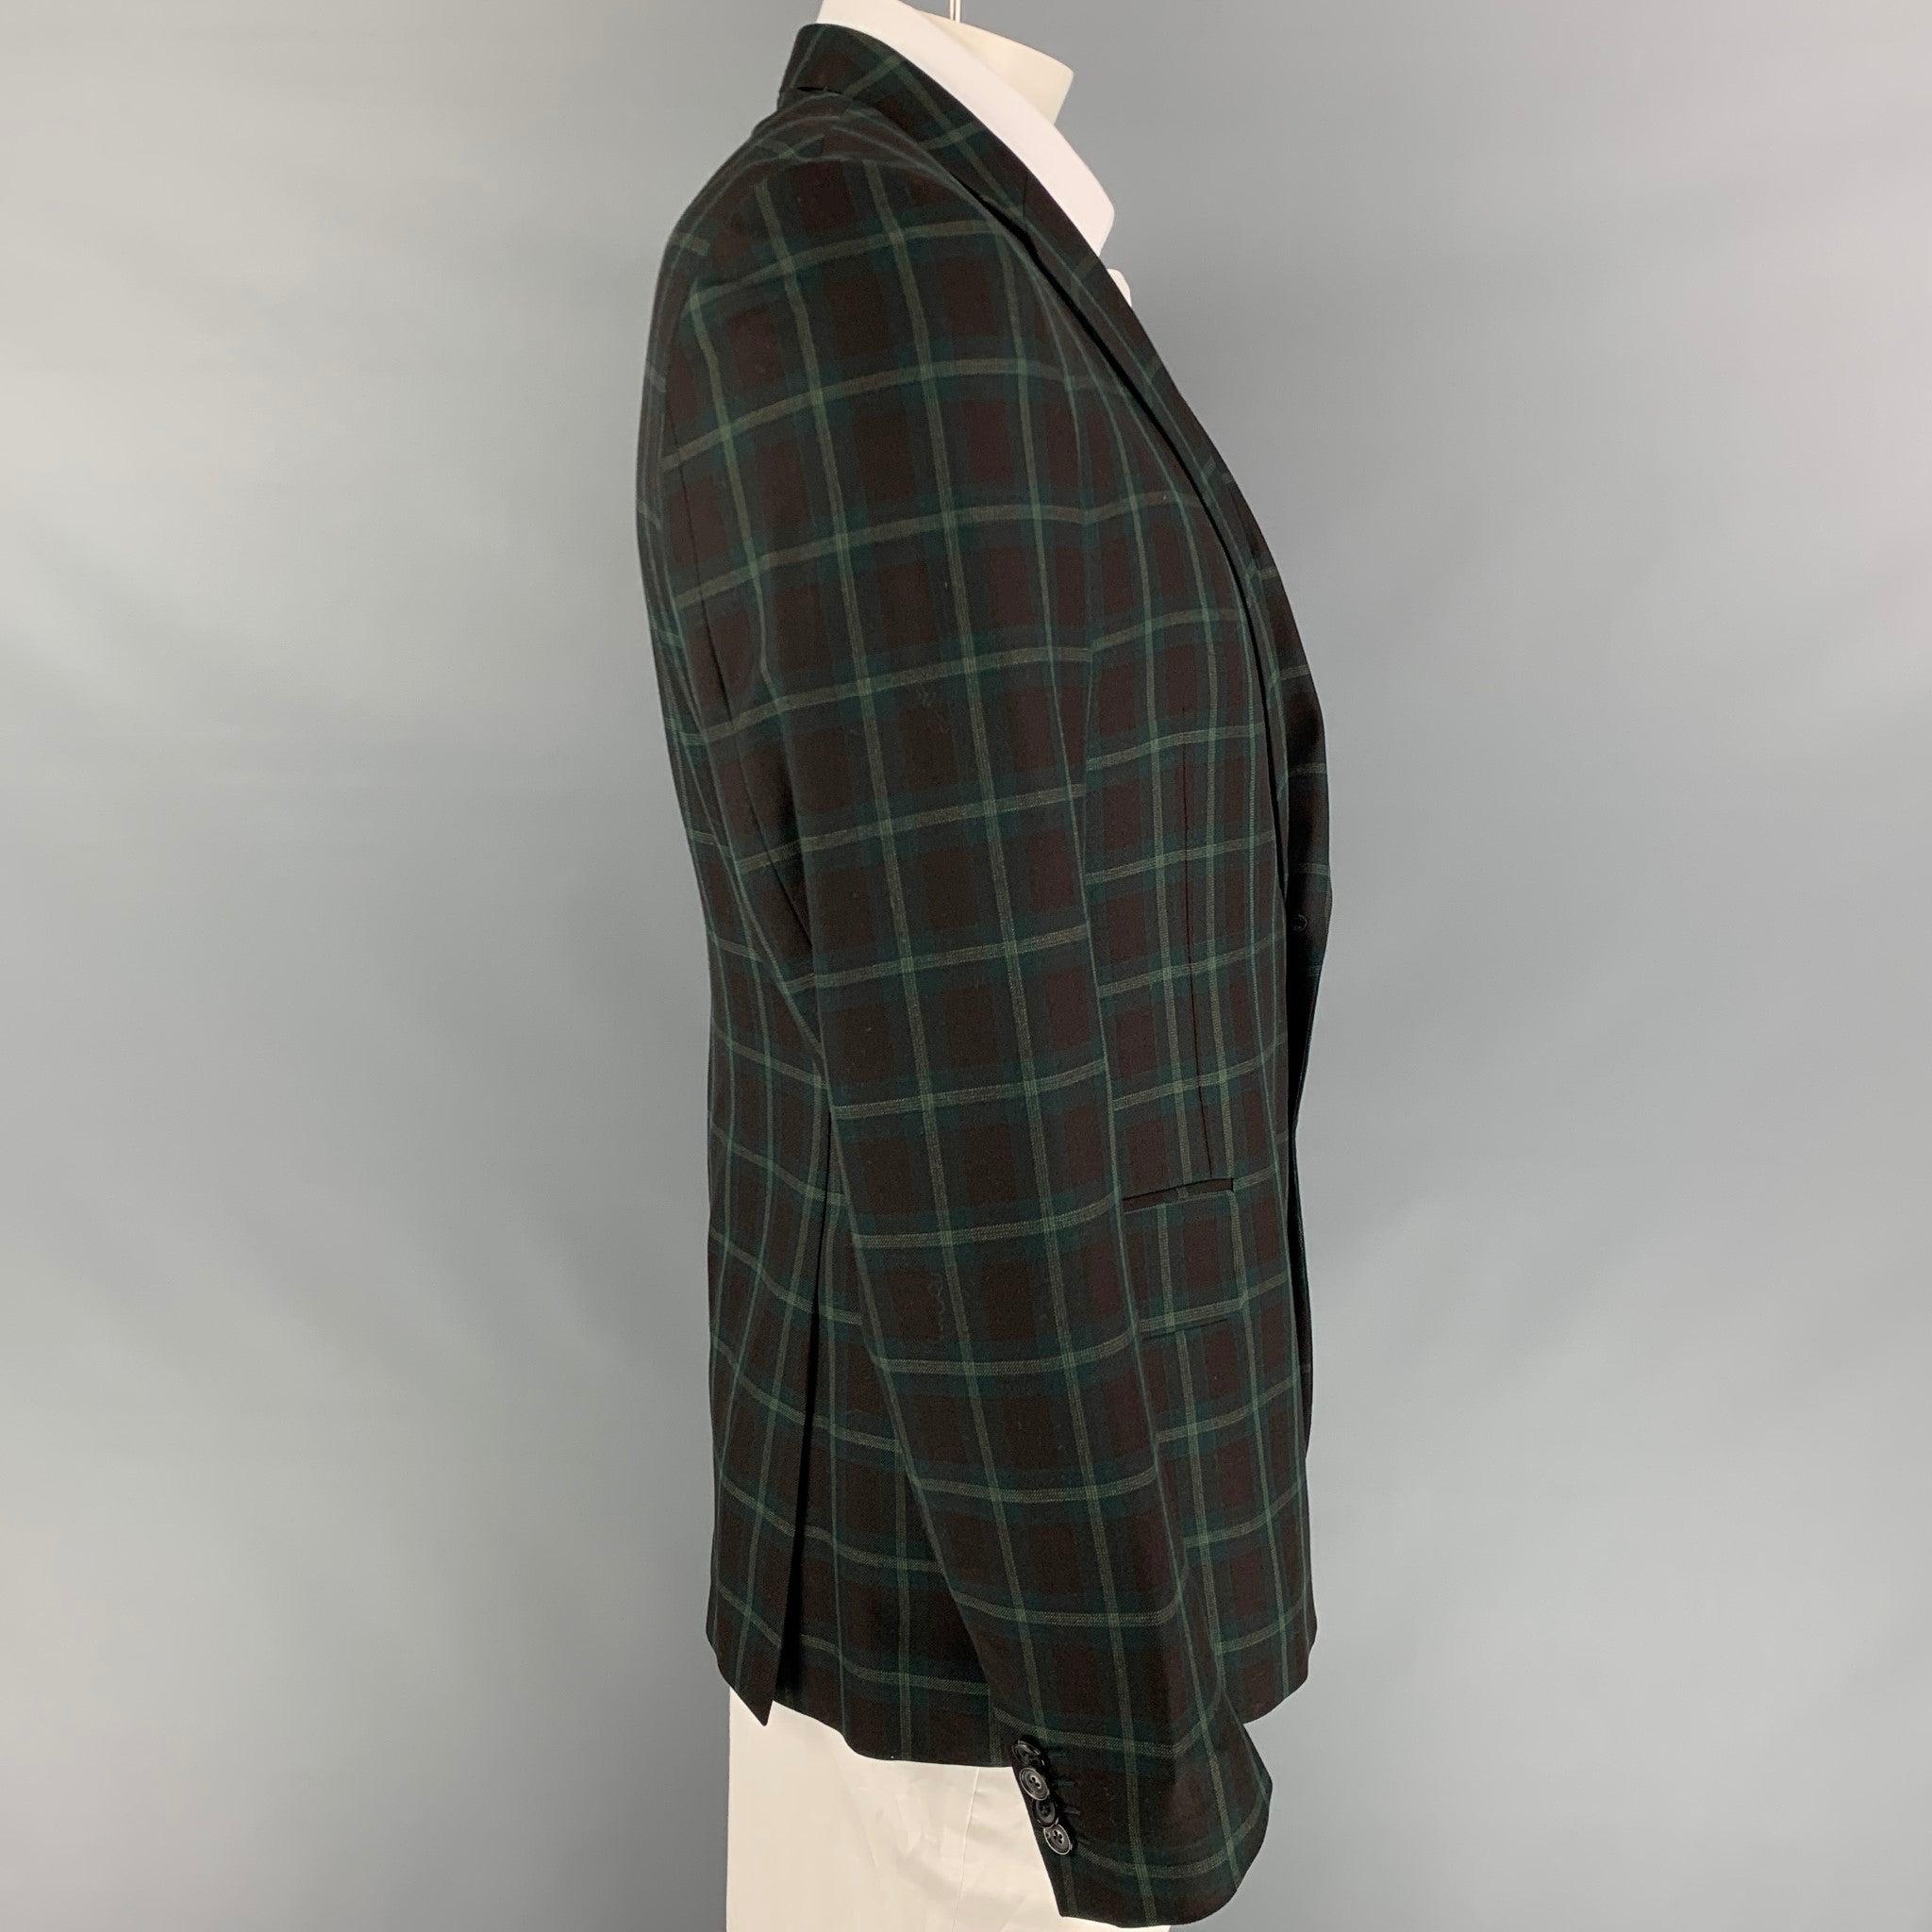 PAUL SMITH Soho Fit Size 46 Brown & Green Plaid Wool Notch Lapel Sport Coat In Good Condition For Sale In San Francisco, CA